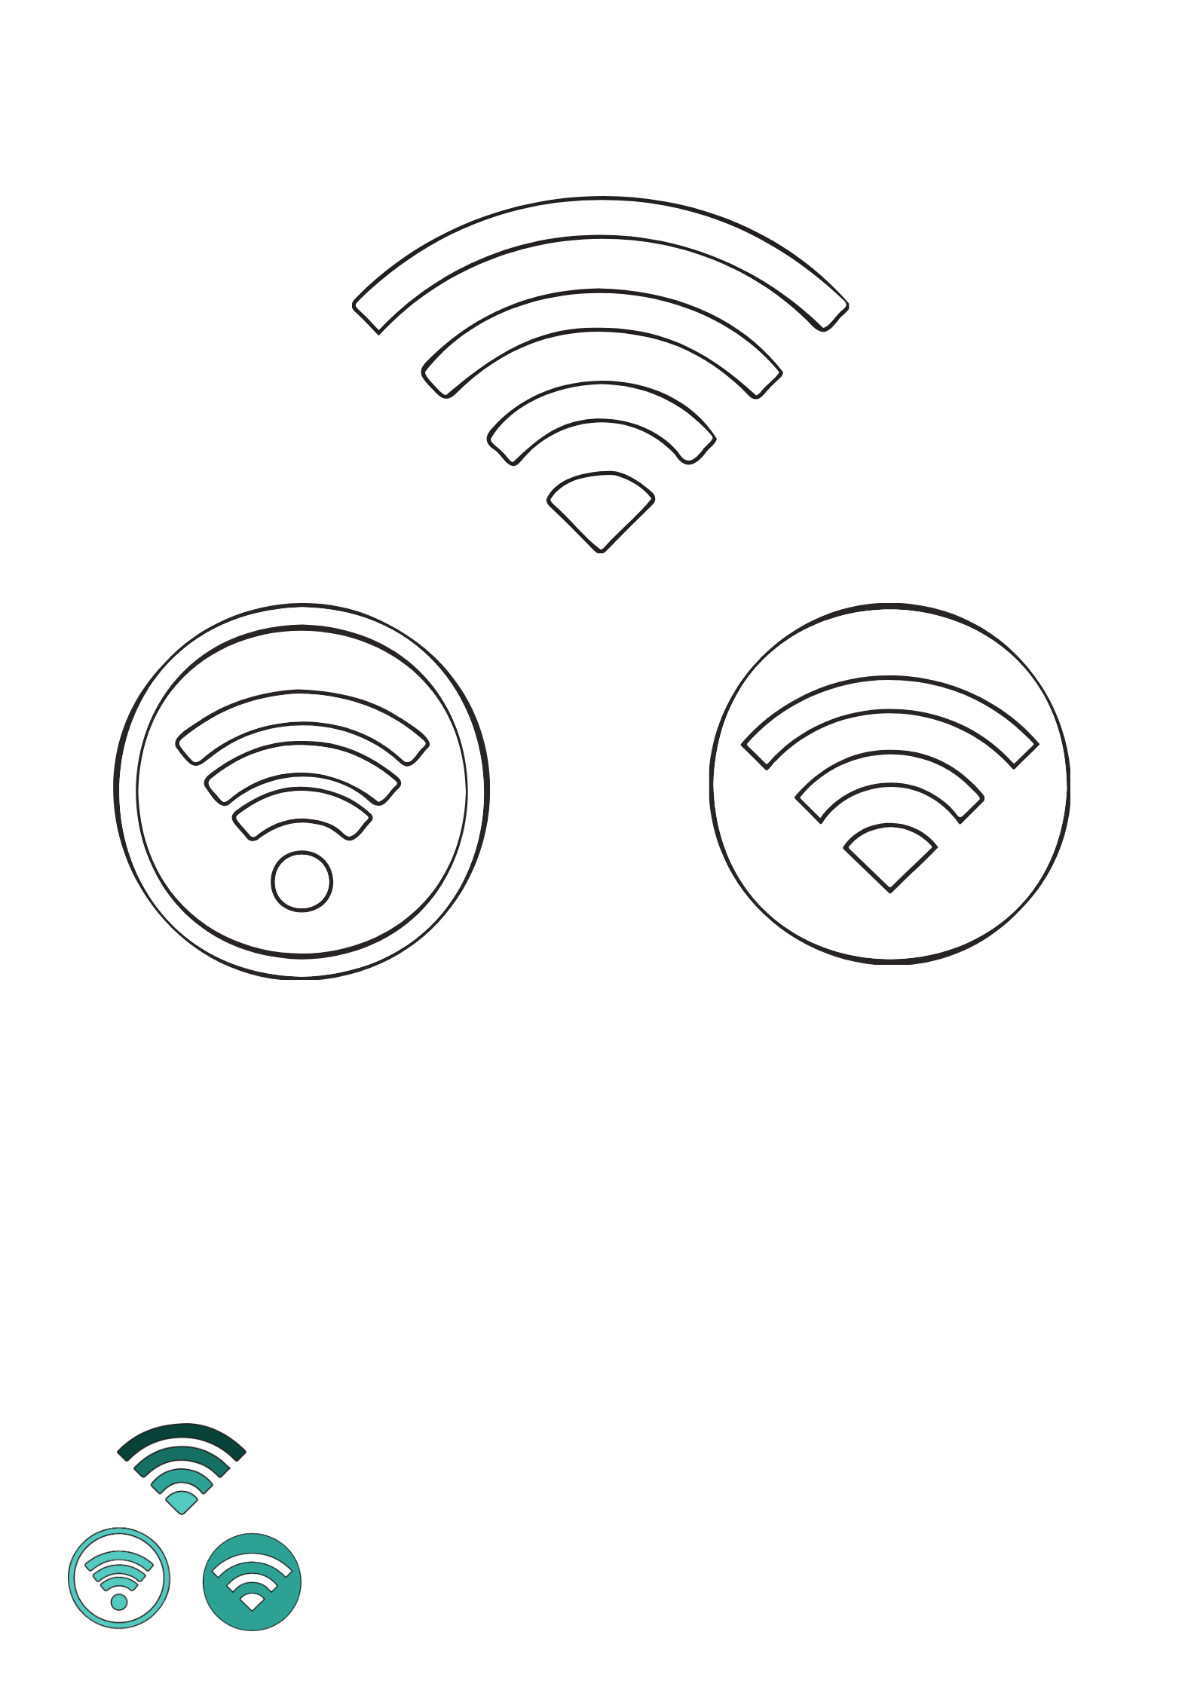 Wifi Shape coloring page